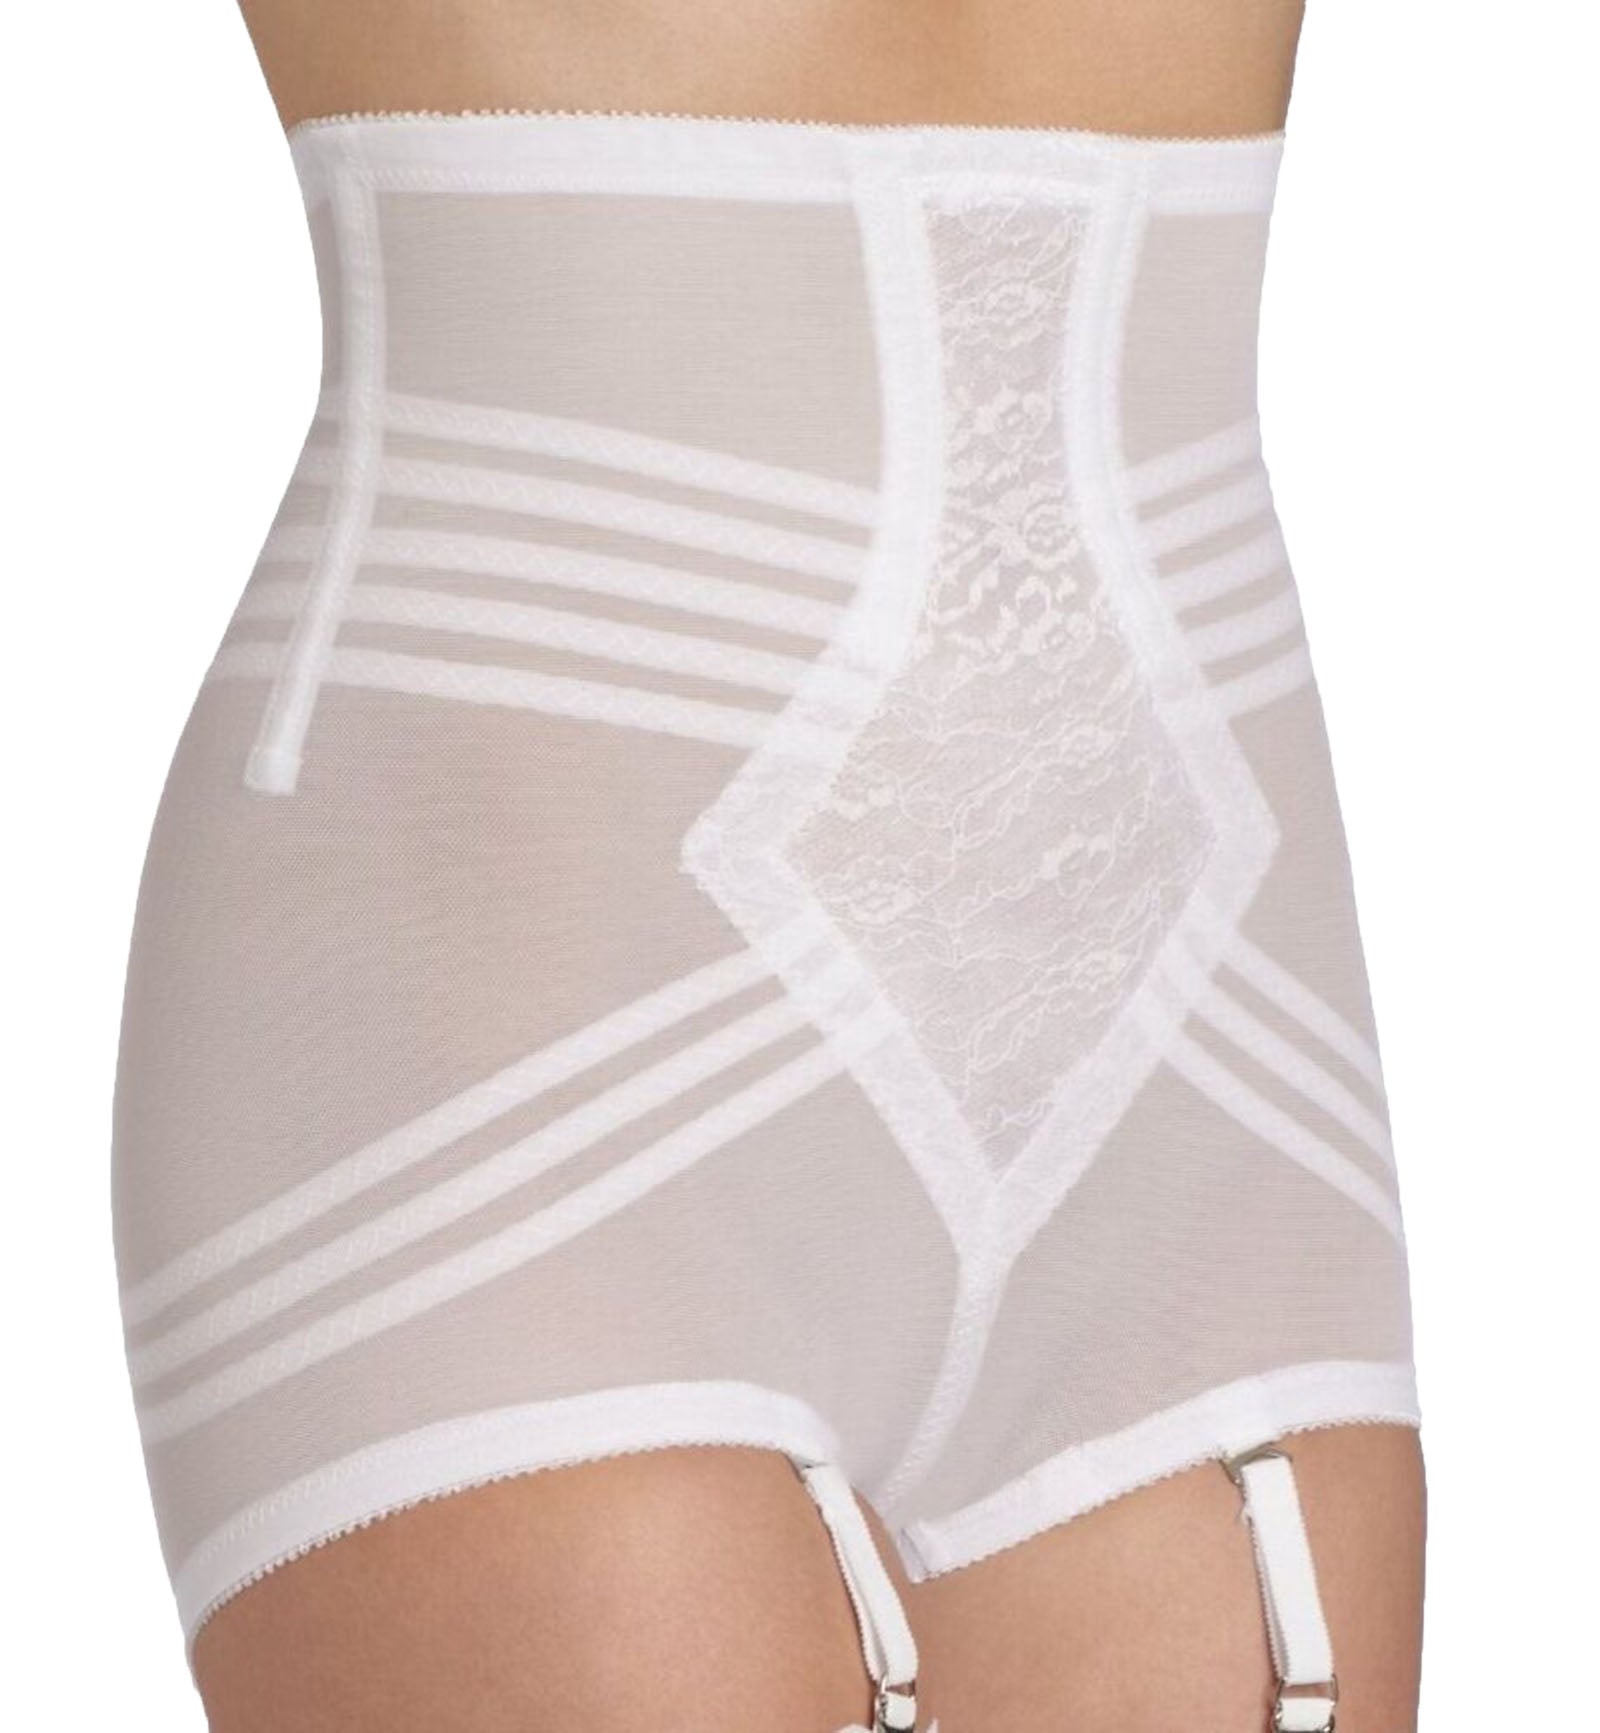 Rago Firm Control High Waist Shaping Panty (6109)- White - Breakout Bras